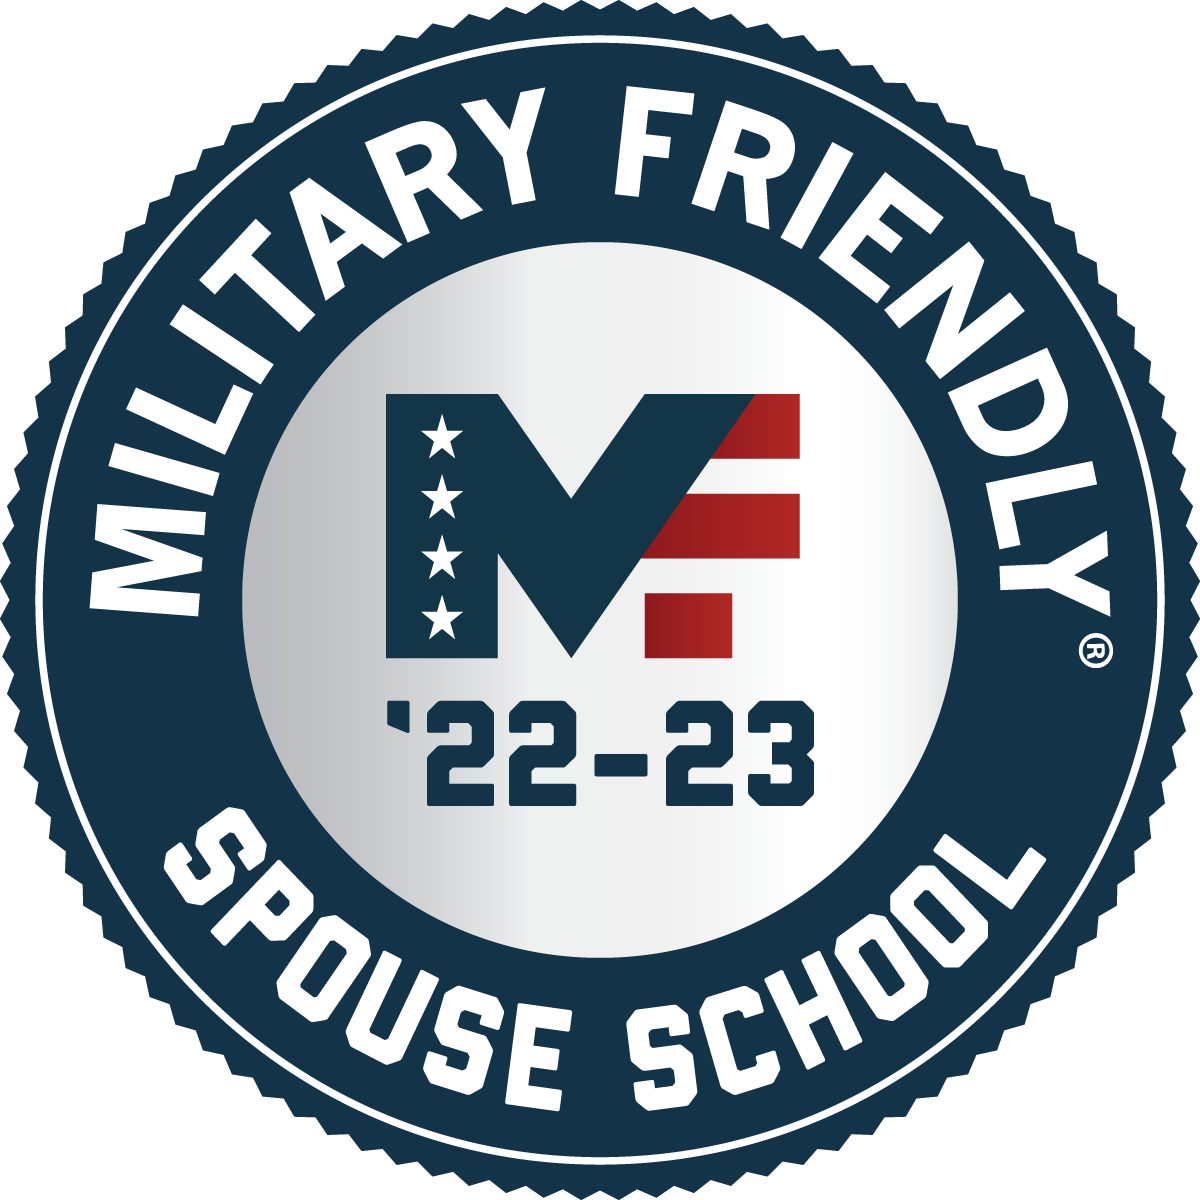 MSFS22-23_Spouses-2.png